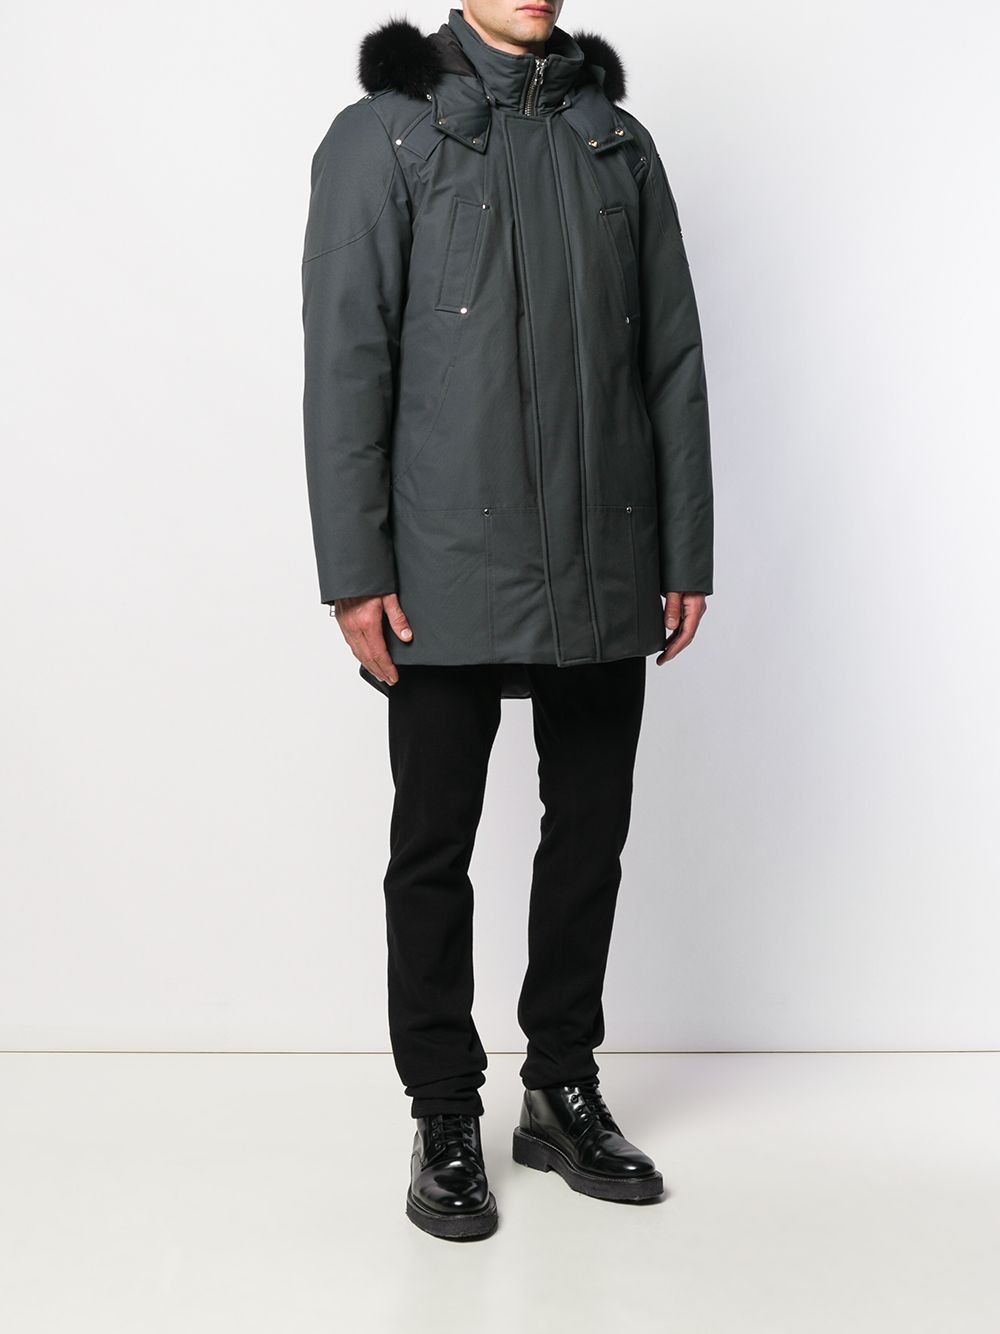 Shop Moose Knuckles Stirling parka with Express Delivery - FARFETCH